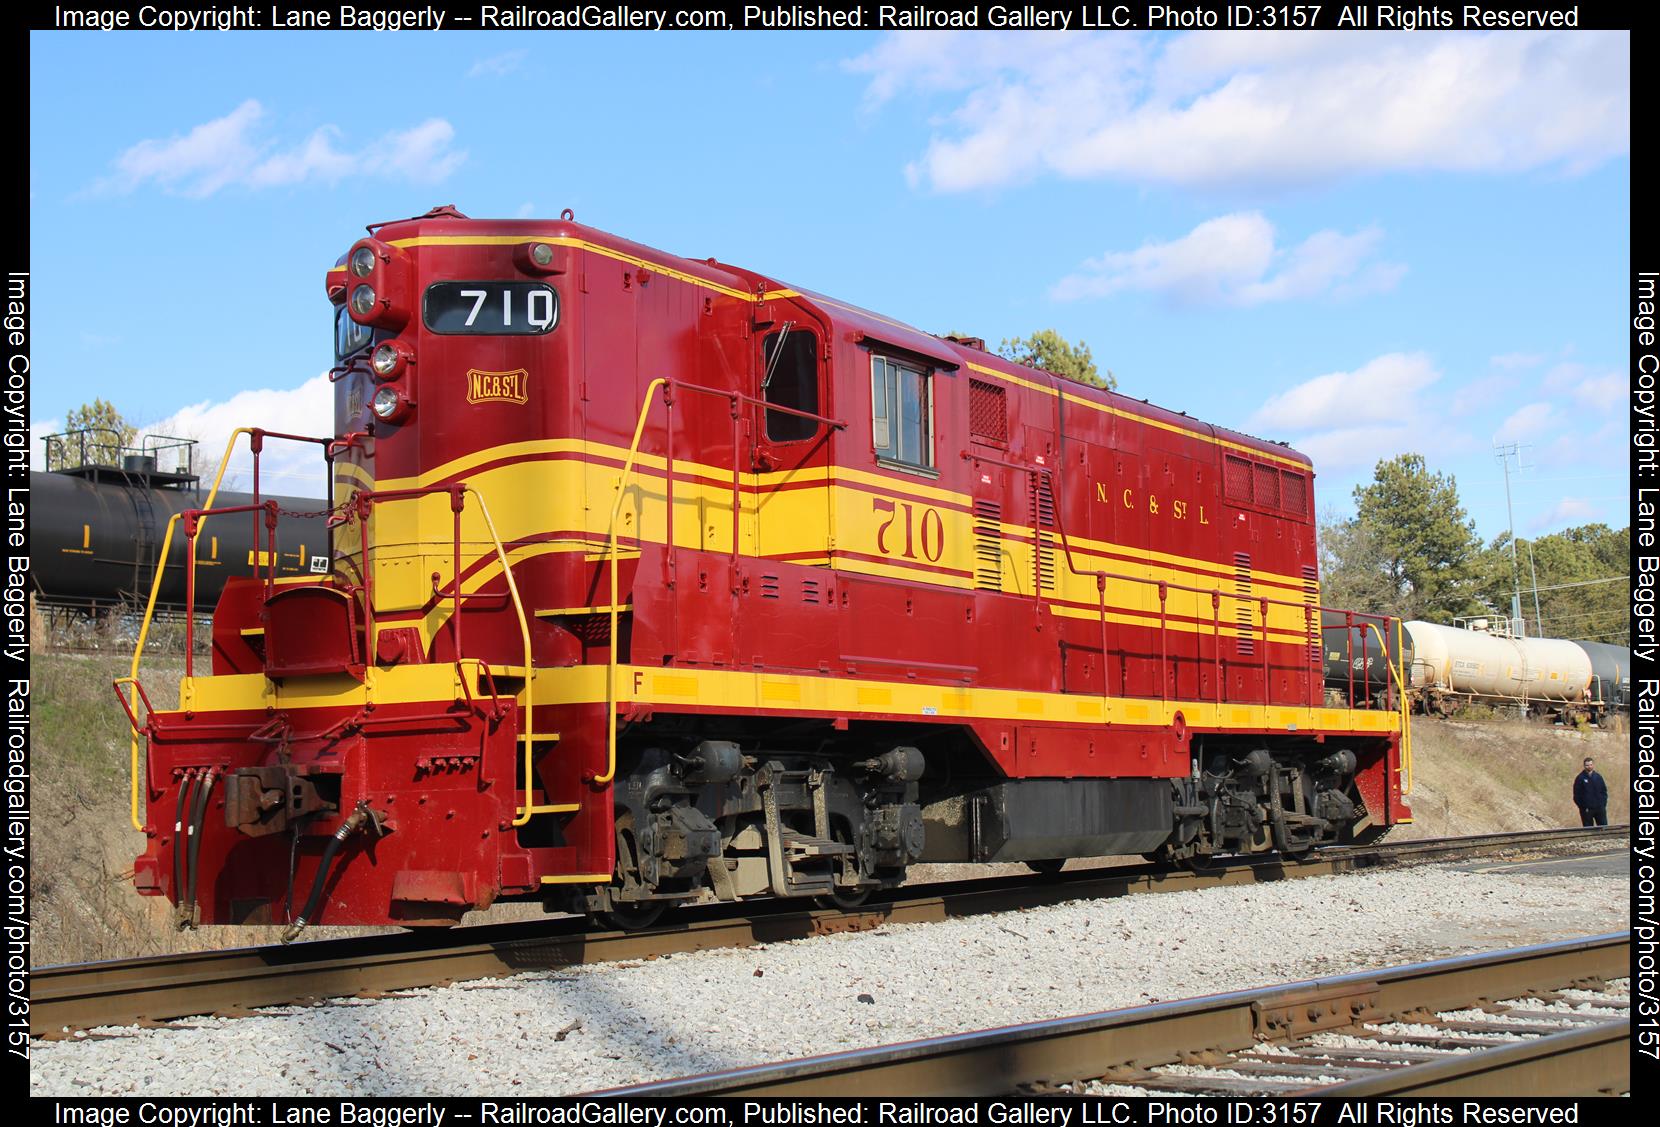 NC&StL 710 is a class EMD GP9 and  is pictured in Chattanooga, Tennessee, United States.  This was taken along the TVRM on the Tennessee Valley. Photo Copyright: Lane Baggerly uploaded to Railroad Gallery on 02/25/2024. This photograph of NC&StL 710 was taken on Sunday, January 17, 2021. All Rights Reserved. 